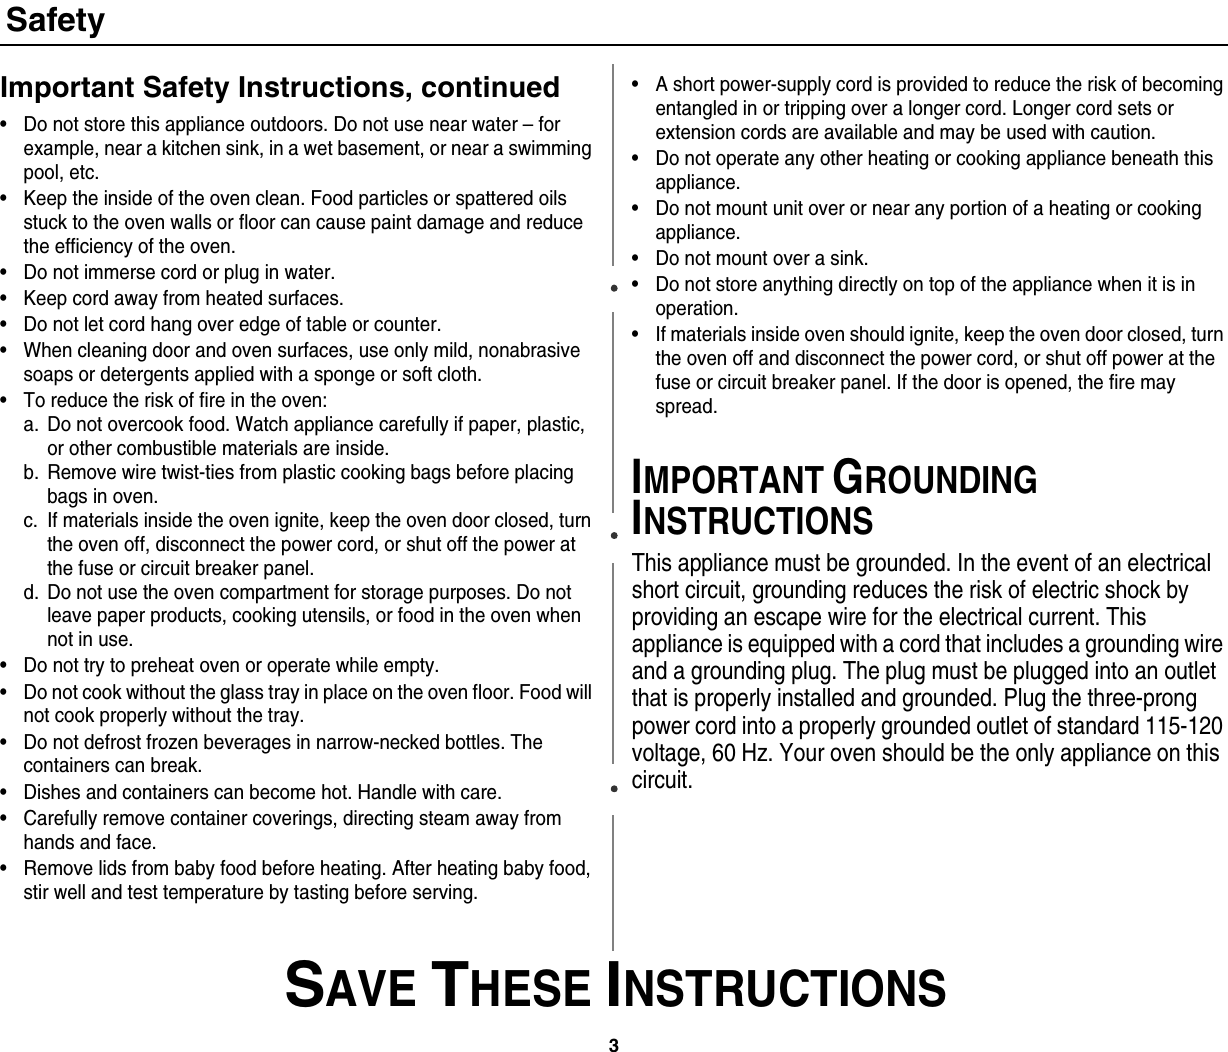 3 SAVE THESE INSTRUCTIONSSafetyImportant Safety Instructions, continued• Do not store this appliance outdoors. Do not use near water – for example, near a kitchen sink, in a wet basement, or near a swimming pool, etc. • Keep the inside of the oven clean. Food particles or spattered oils stuck to the oven walls or floor can cause paint damage and reduce the efficiency of the oven.• Do not immerse cord or plug in water.• Keep cord away from heated surfaces.• Do not let cord hang over edge of table or counter.• When cleaning door and oven surfaces, use only mild, nonabrasive soaps or detergents applied with a sponge or soft cloth.• To reduce the risk of fire in the oven:a. Do not overcook food. Watch appliance carefully if paper, plastic, or other combustible materials are inside.b. Remove wire twist-ties from plastic cooking bags before placing bags in oven.c. If materials inside the oven ignite, keep the oven door closed, turn the oven off, disconnect the power cord, or shut off the power at the fuse or circuit breaker panel.d. Do not use the oven compartment for storage purposes. Do not leave paper products, cooking utensils, or food in the oven when not in use.• Do not try to preheat oven or operate while empty.• Do not cook without the glass tray in place on the oven floor. Food will not cook properly without the tray.• Do not defrost frozen beverages in narrow-necked bottles. The containers can break.• Dishes and containers can become hot. Handle with care.• Carefully remove container coverings, directing steam away from hands and face.• Remove lids from baby food before heating. After heating baby food, stir well and test temperature by tasting before serving.• A short power-supply cord is provided to reduce the risk of becoming entangled in or tripping over a longer cord. Longer cord sets or extension cords are available and may be used with caution. • Do not operate any other heating or cooking appliance beneath this appliance.• Do not mount unit over or near any portion of a heating or cooking appliance.• Do not mount over a sink.• Do not store anything directly on top of the appliance when it is in operation.• If materials inside oven should ignite, keep the oven door closed, turn the oven off and disconnect the power cord, or shut off power at the fuse or circuit breaker panel. If the door is opened, the fire may spread.IMPORTANT GROUNDING INSTRUCTIONSThis appliance must be grounded. In the event of an electrical short circuit, grounding reduces the risk of electric shock by providing an escape wire for the electrical current. This appliance is equipped with a cord that includes a grounding wire and a grounding plug. The plug must be plugged into an outlet that is properly installed and grounded. Plug the three-prong power cord into a properly grounded outlet of standard 115-120 voltage, 60 Hz. Your oven should be the only appliance on this circuit.